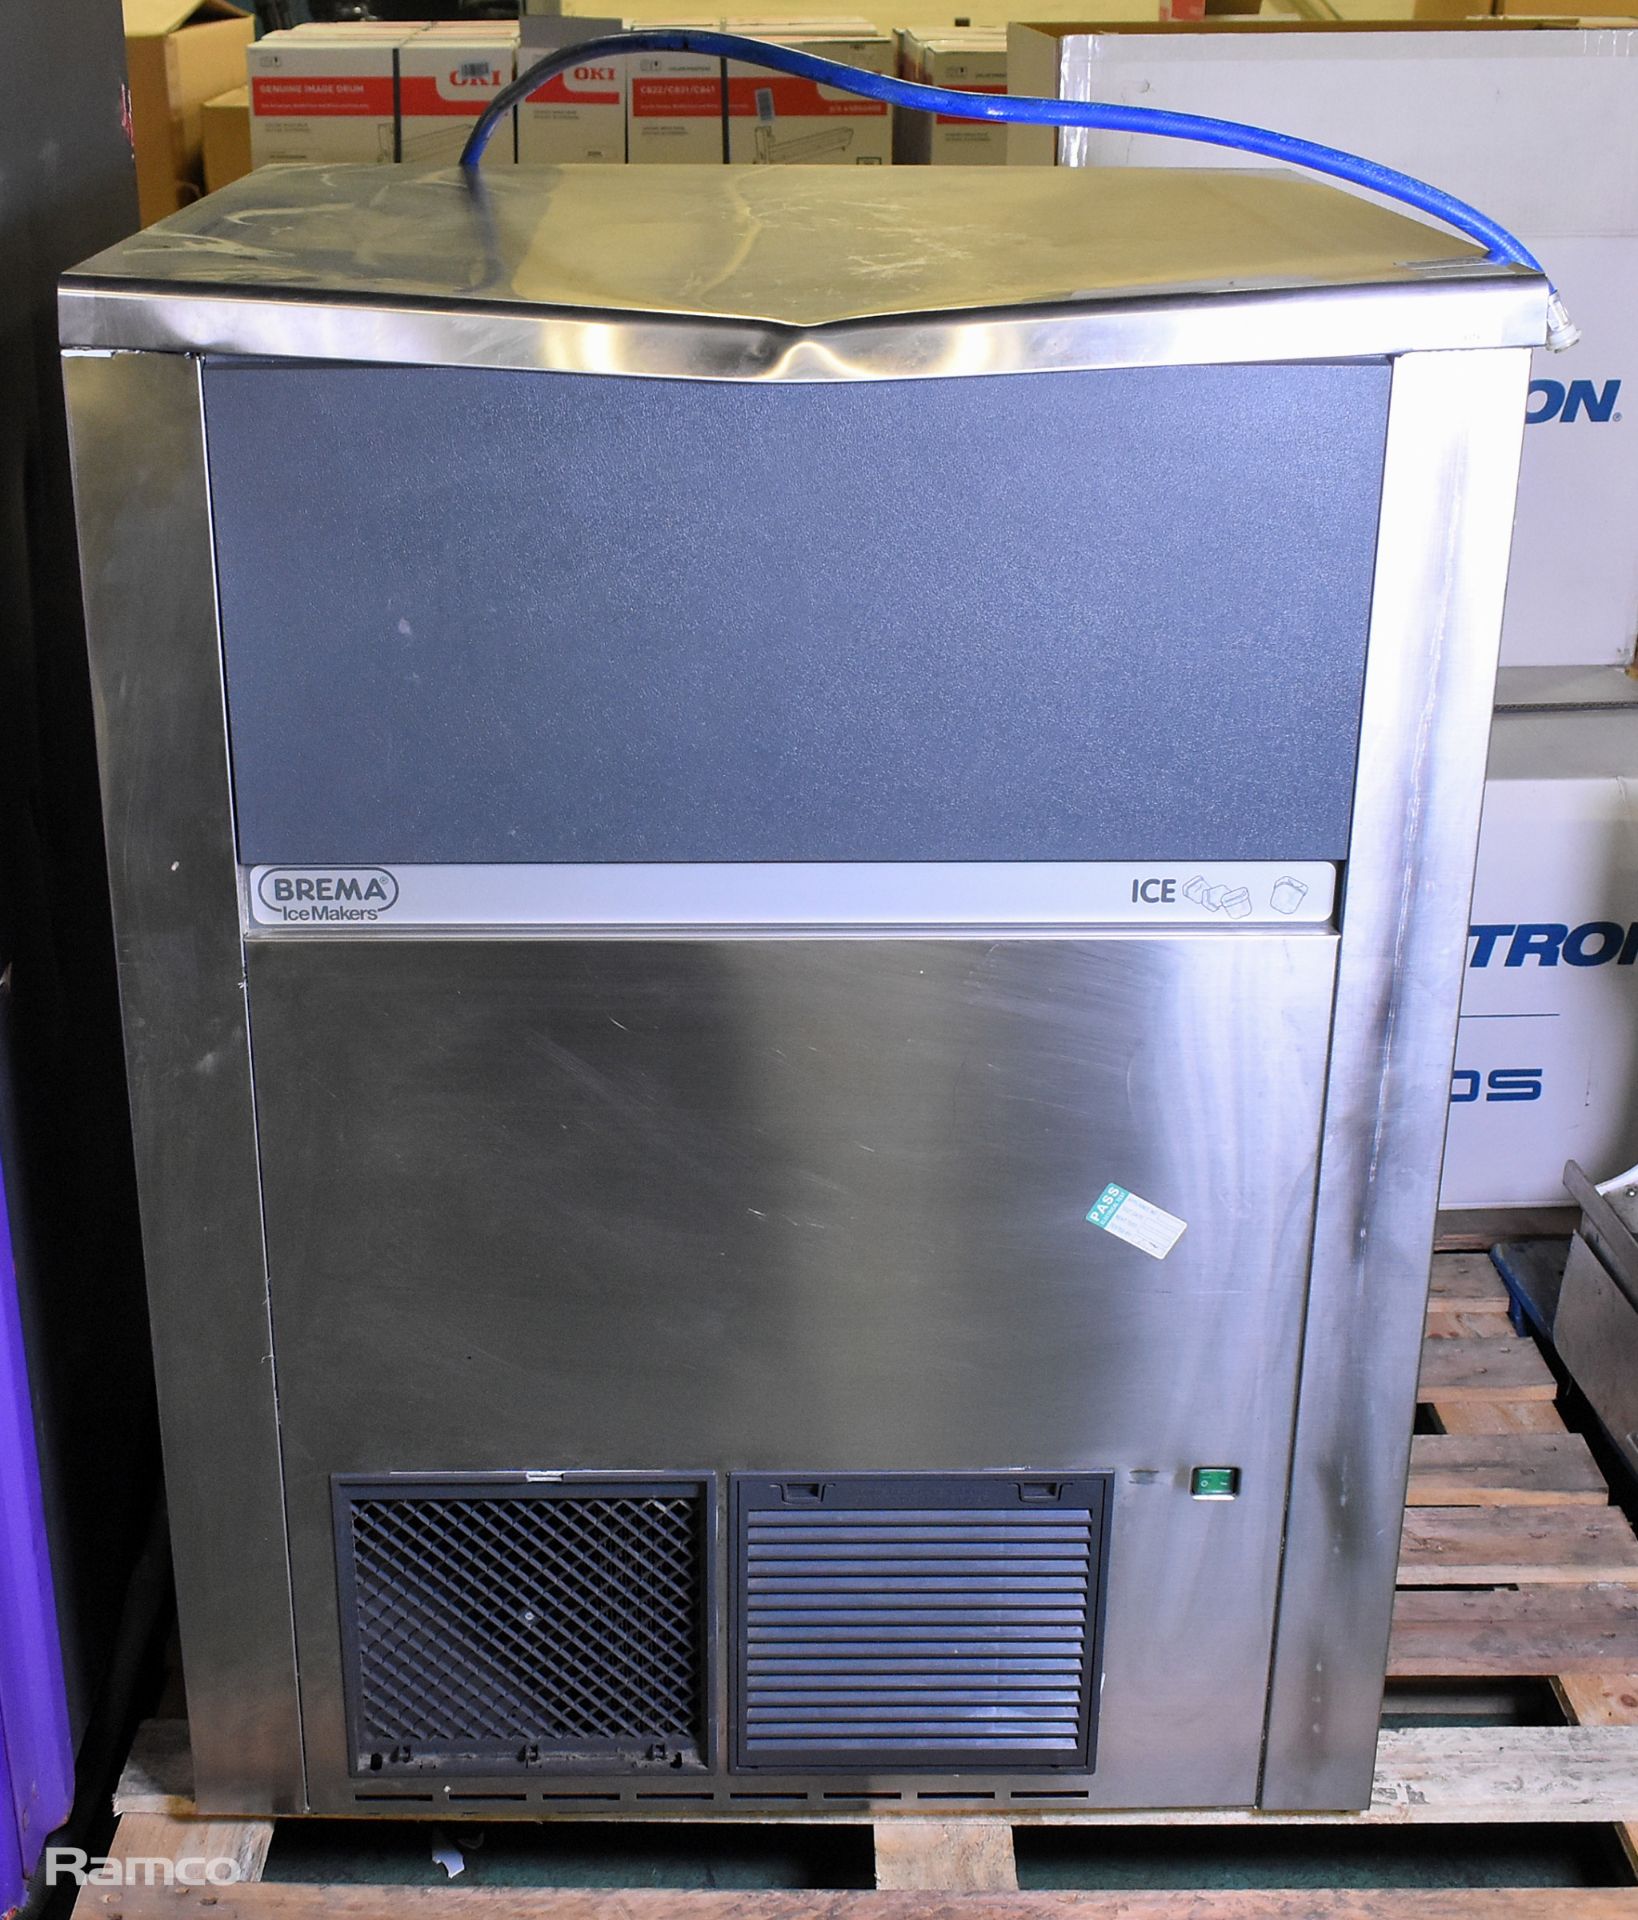 Brema CB1265A-Q stainless steel ice maker - W 840 x D 740 x H 1070mm - DENTED TOP PANEL